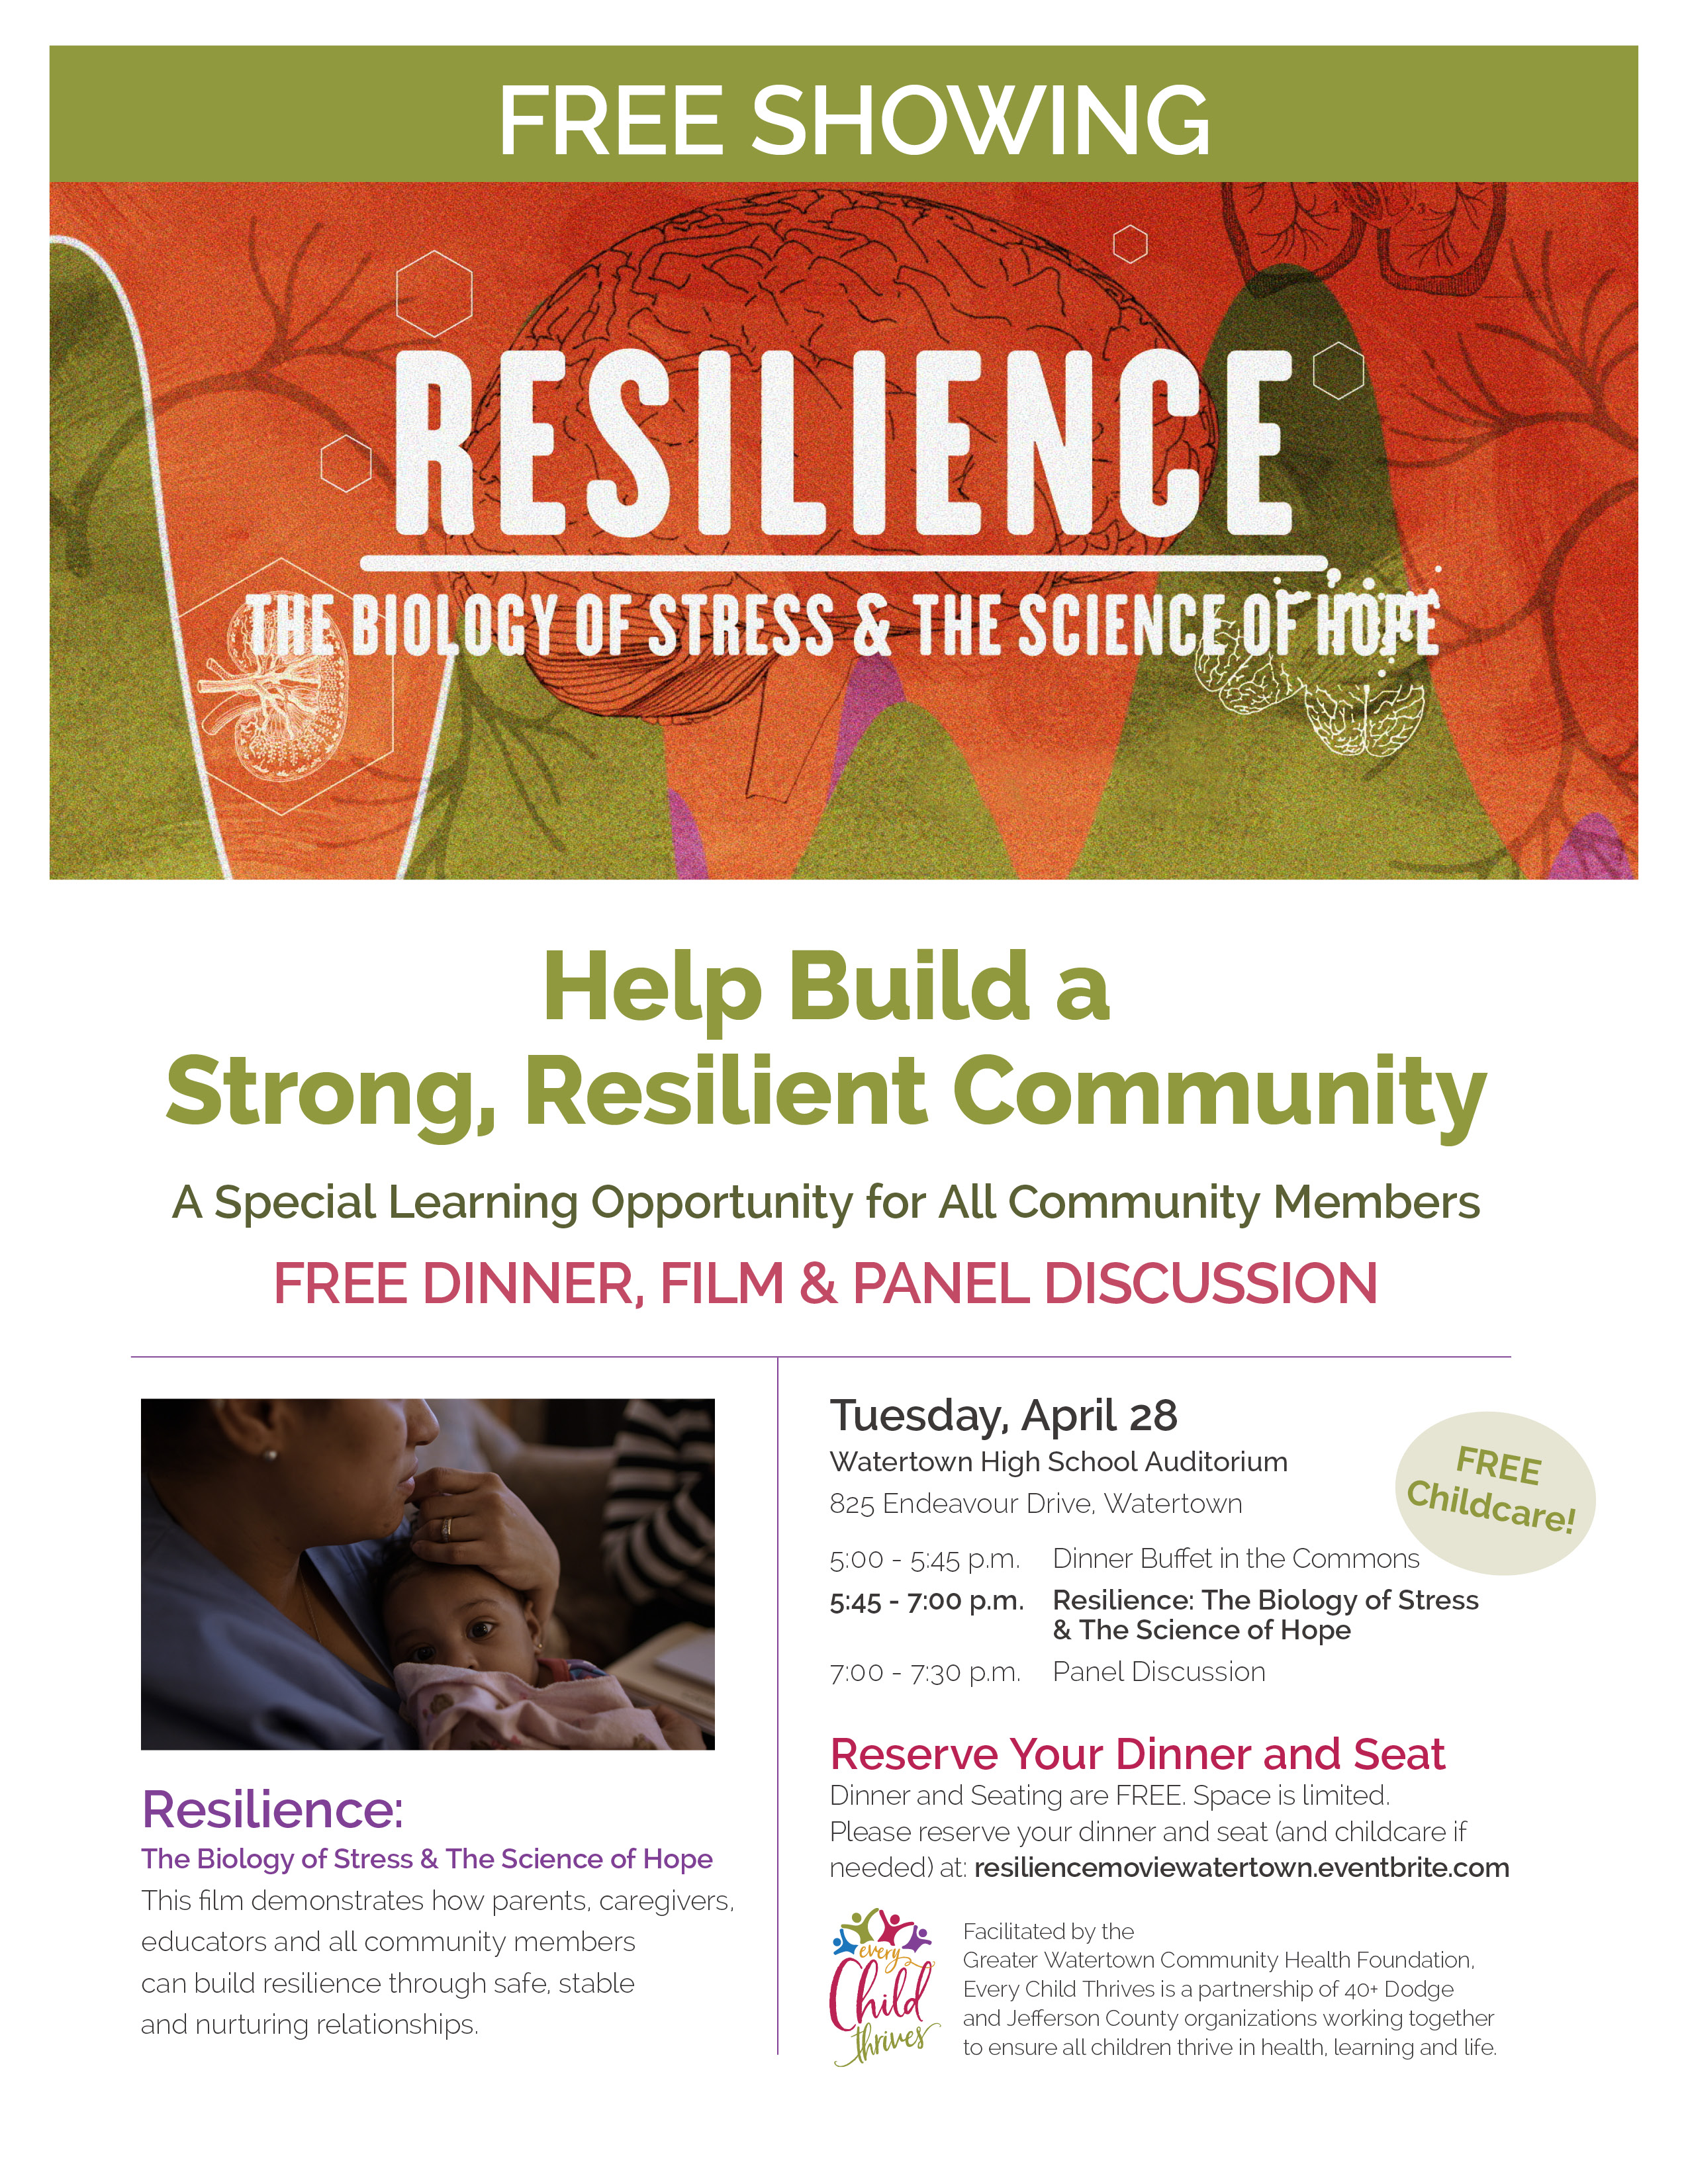 Resilience film